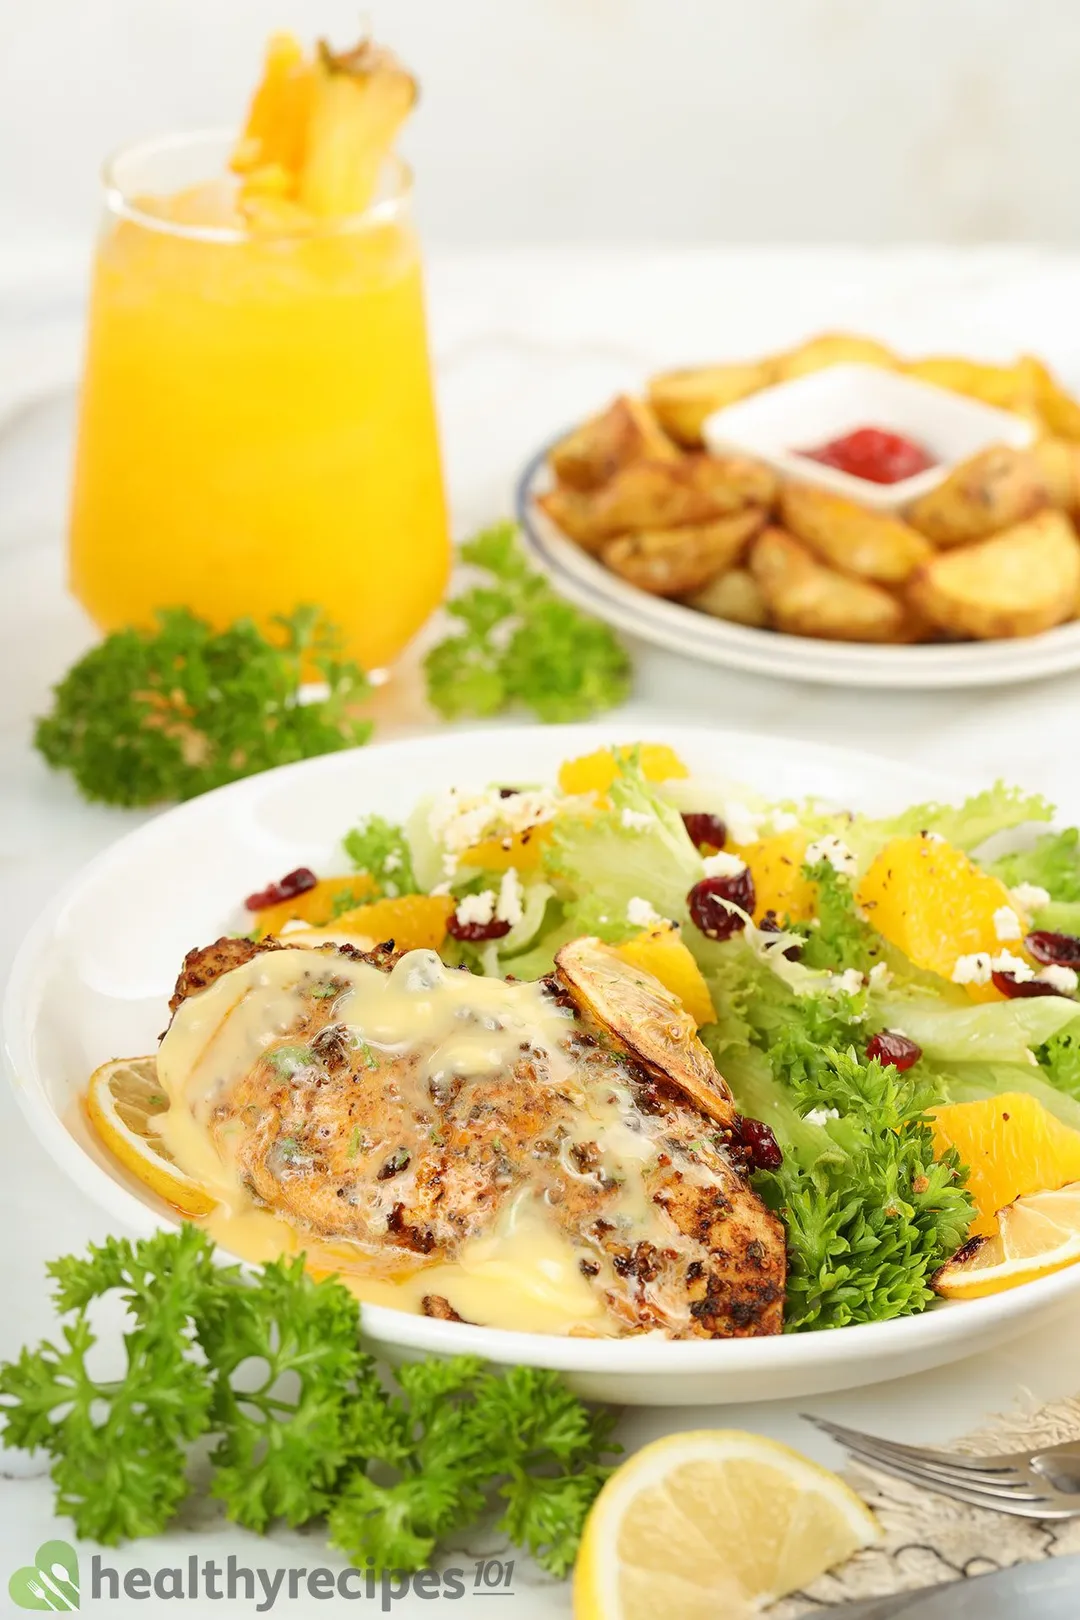 a plate of cooked chicken breast and salad decorated with a glass of orange juice and a plate of potato wedge